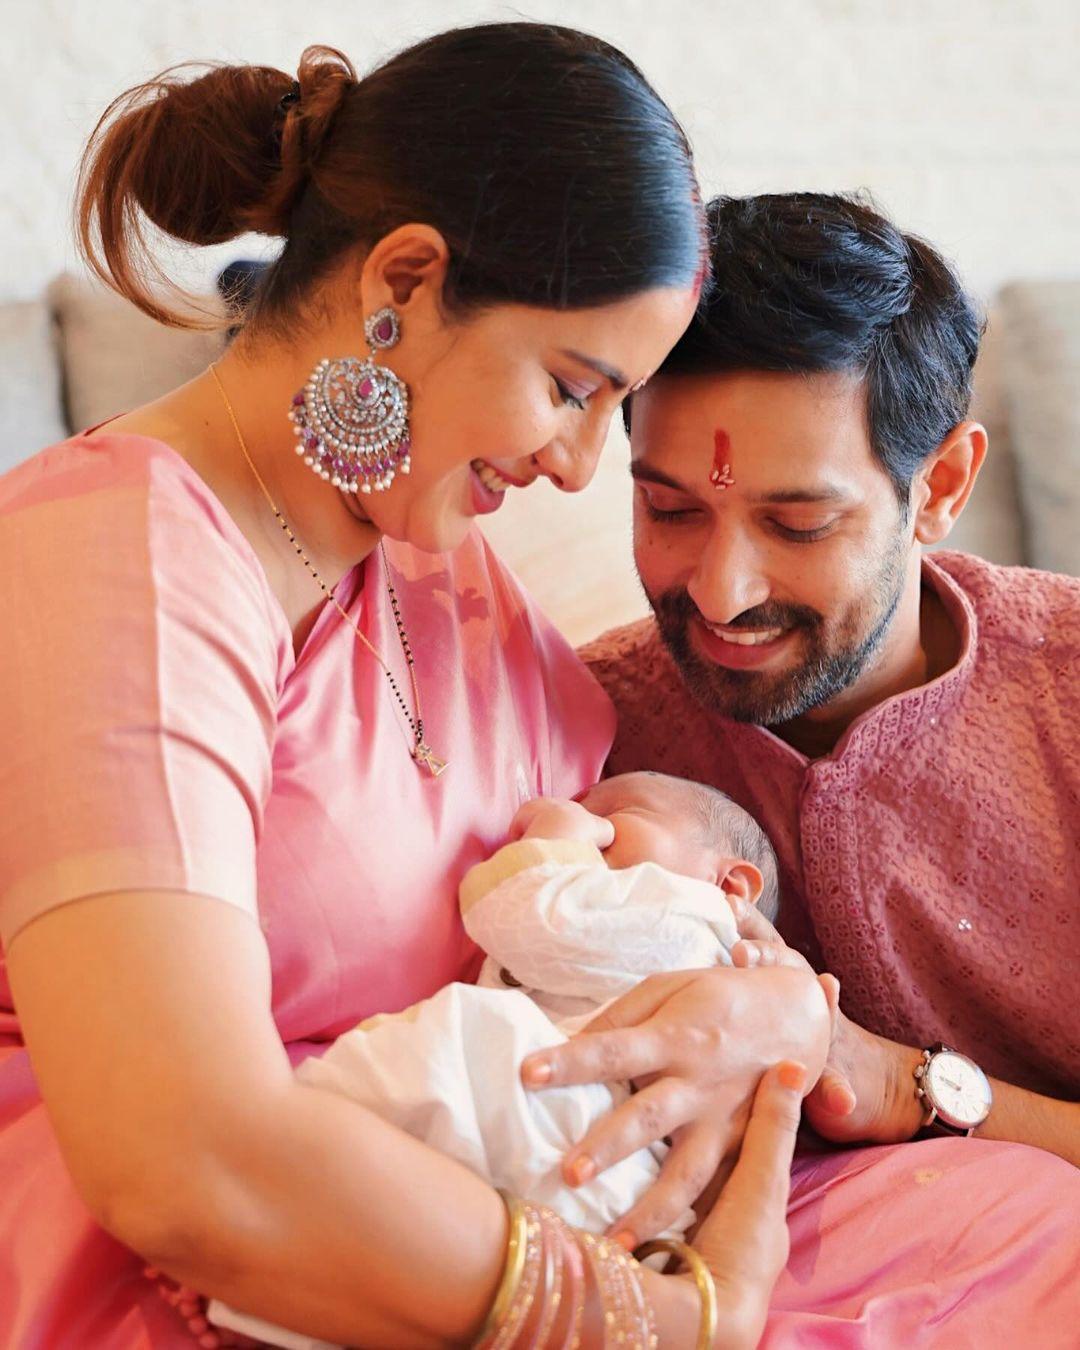 Vikrant Massey embraced fatherhood this year when he welcomed his baby boy, Vardaan